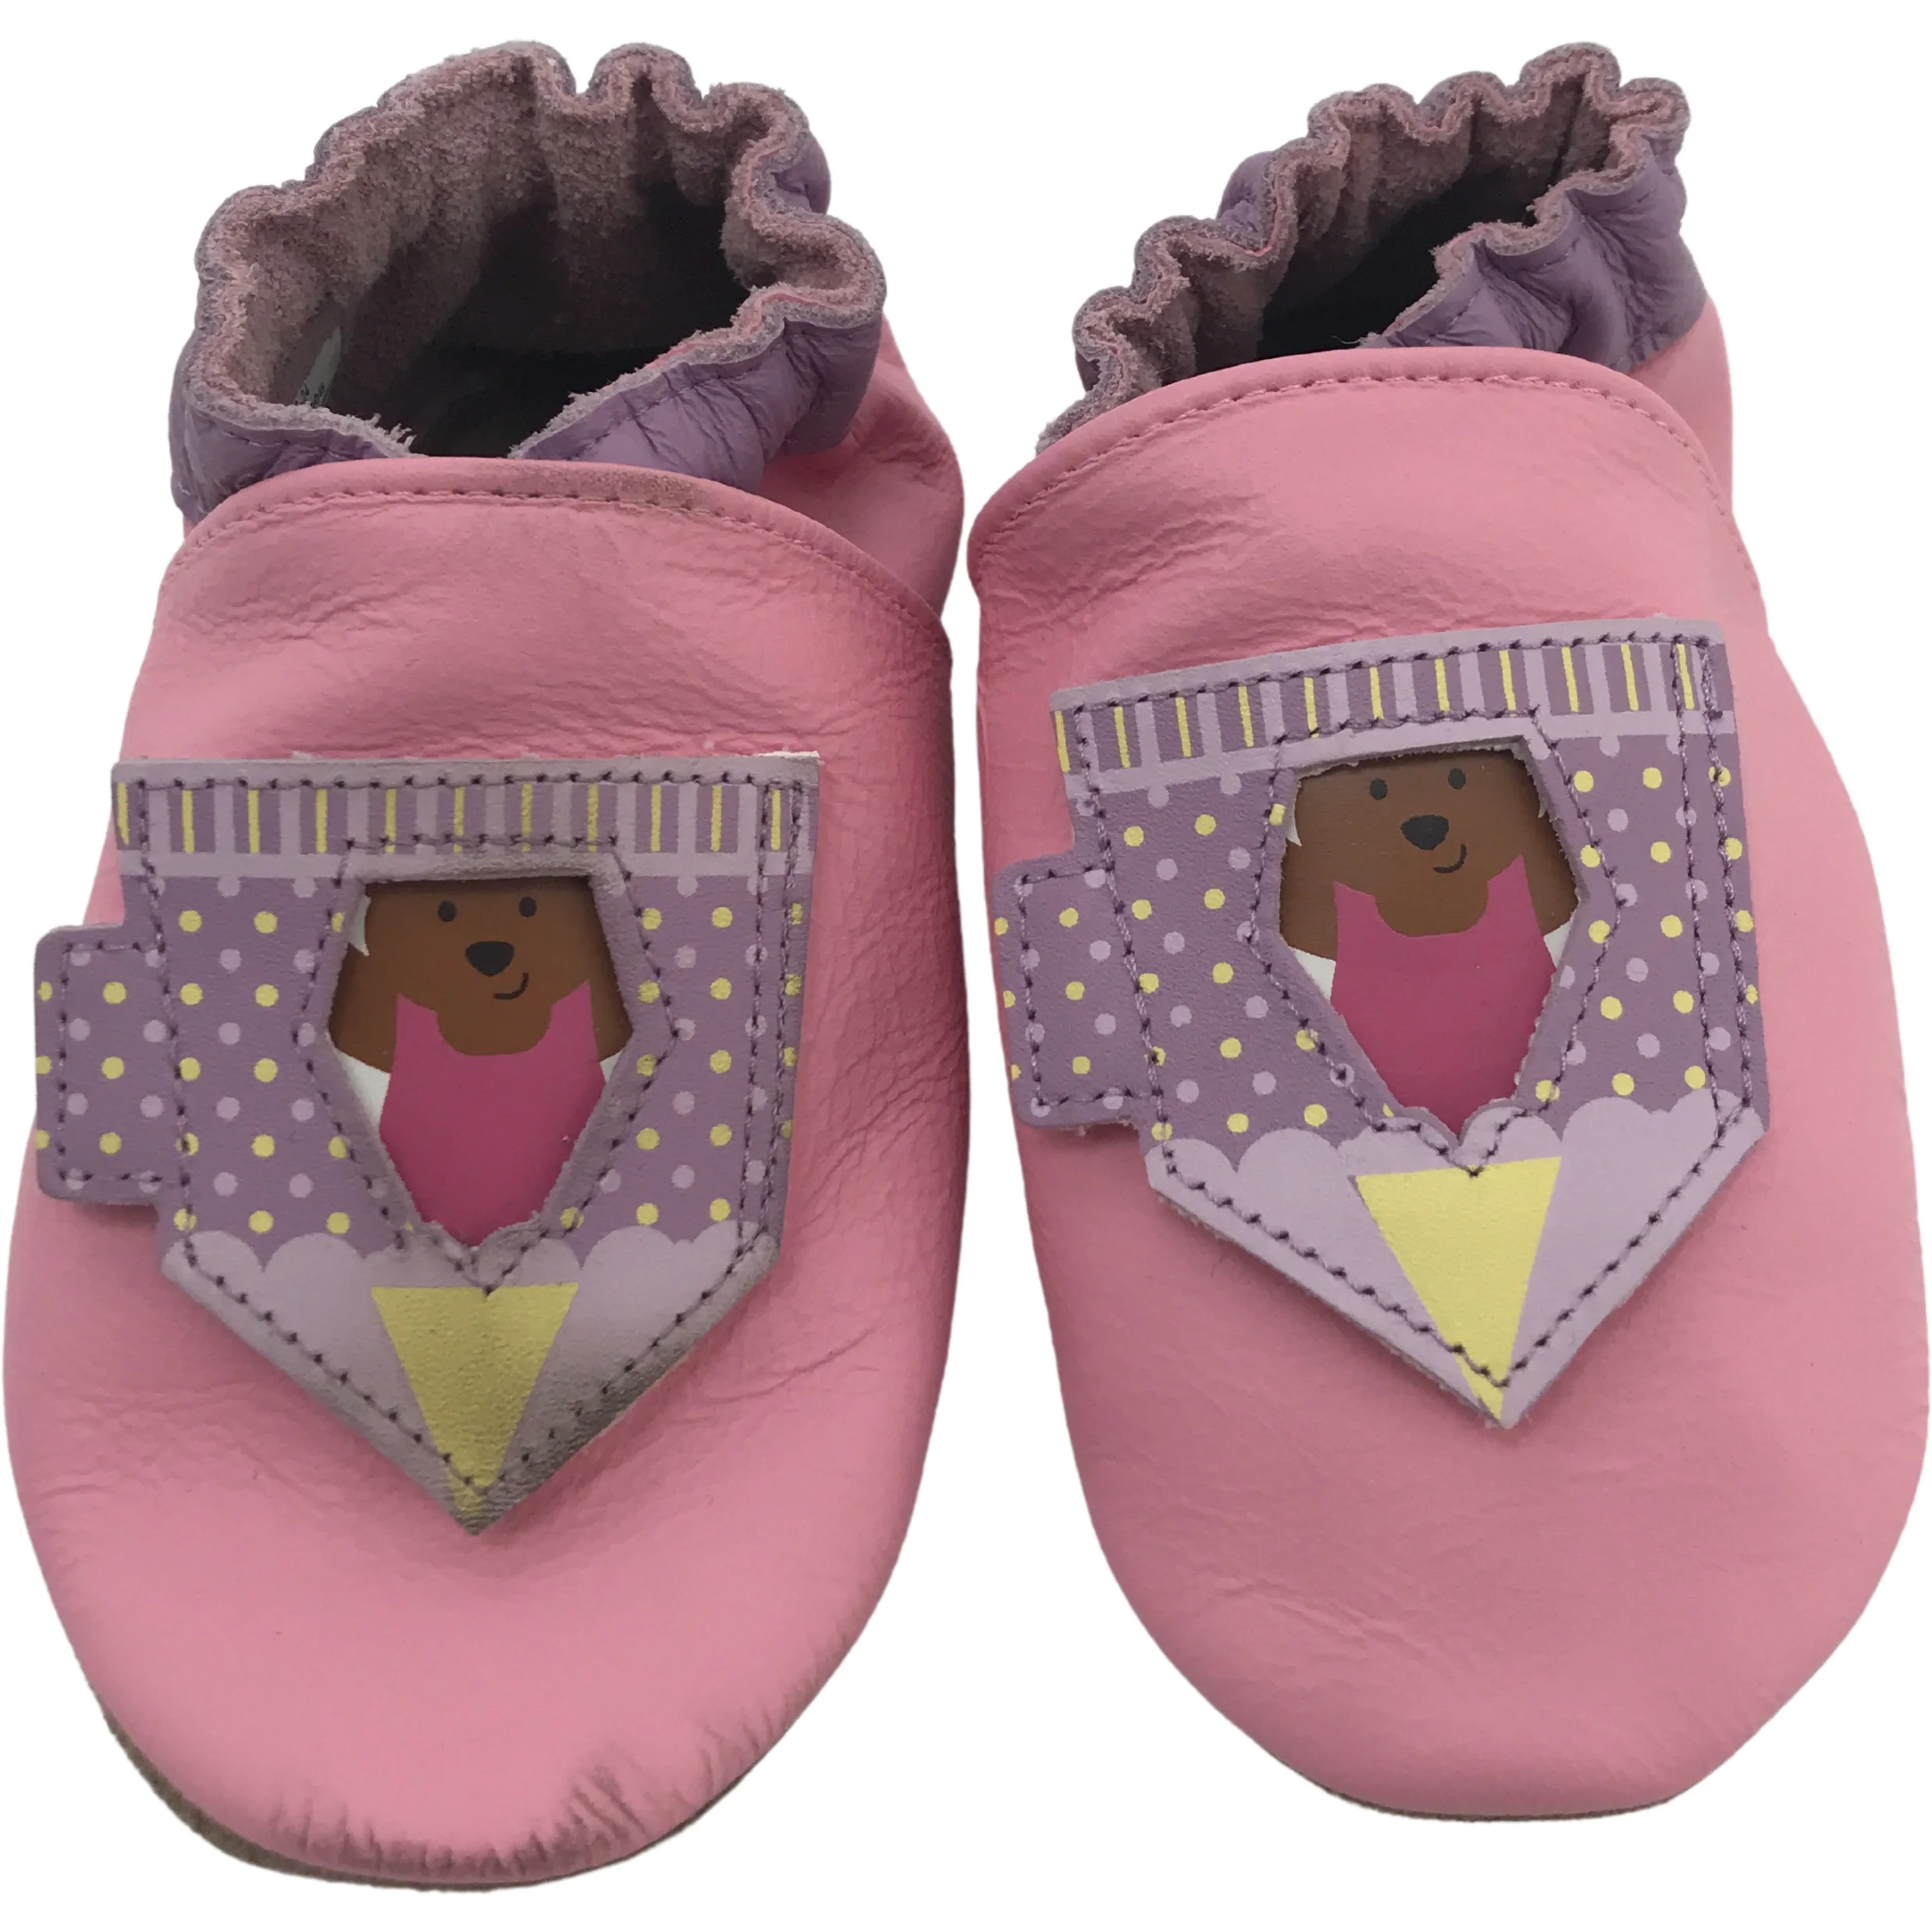 Robeez Toddler Soft Sole Shoes / Pink / Slip On / 18-24 Months